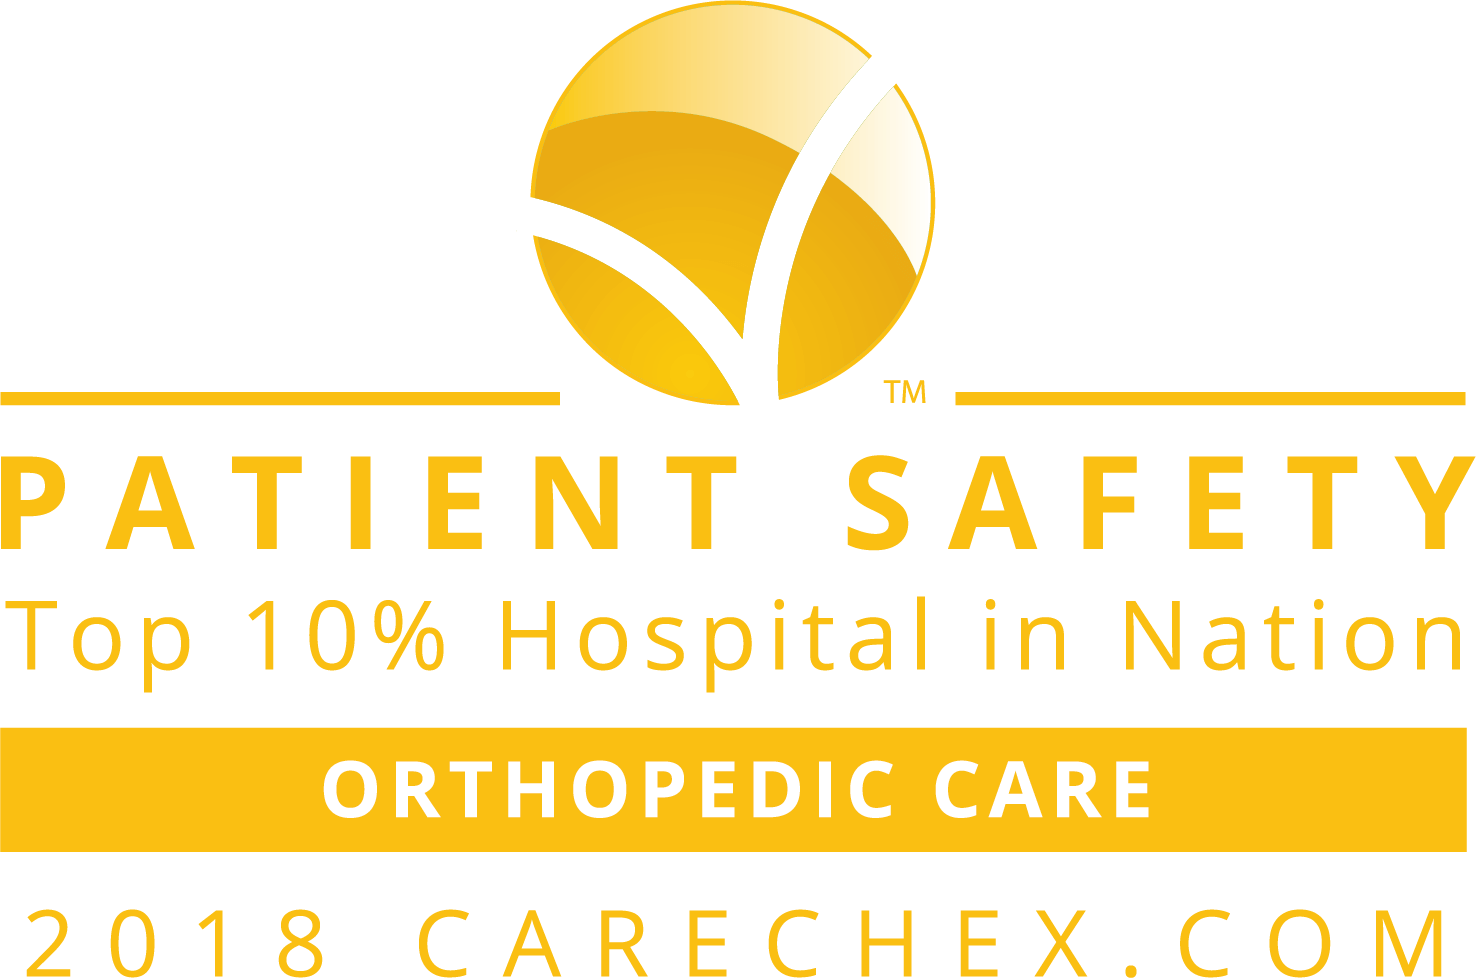 Williamson Medical Center 2018 CareChex Award - Top 10% of Hospitals in Nation for Patient Safety Orthopedic care.